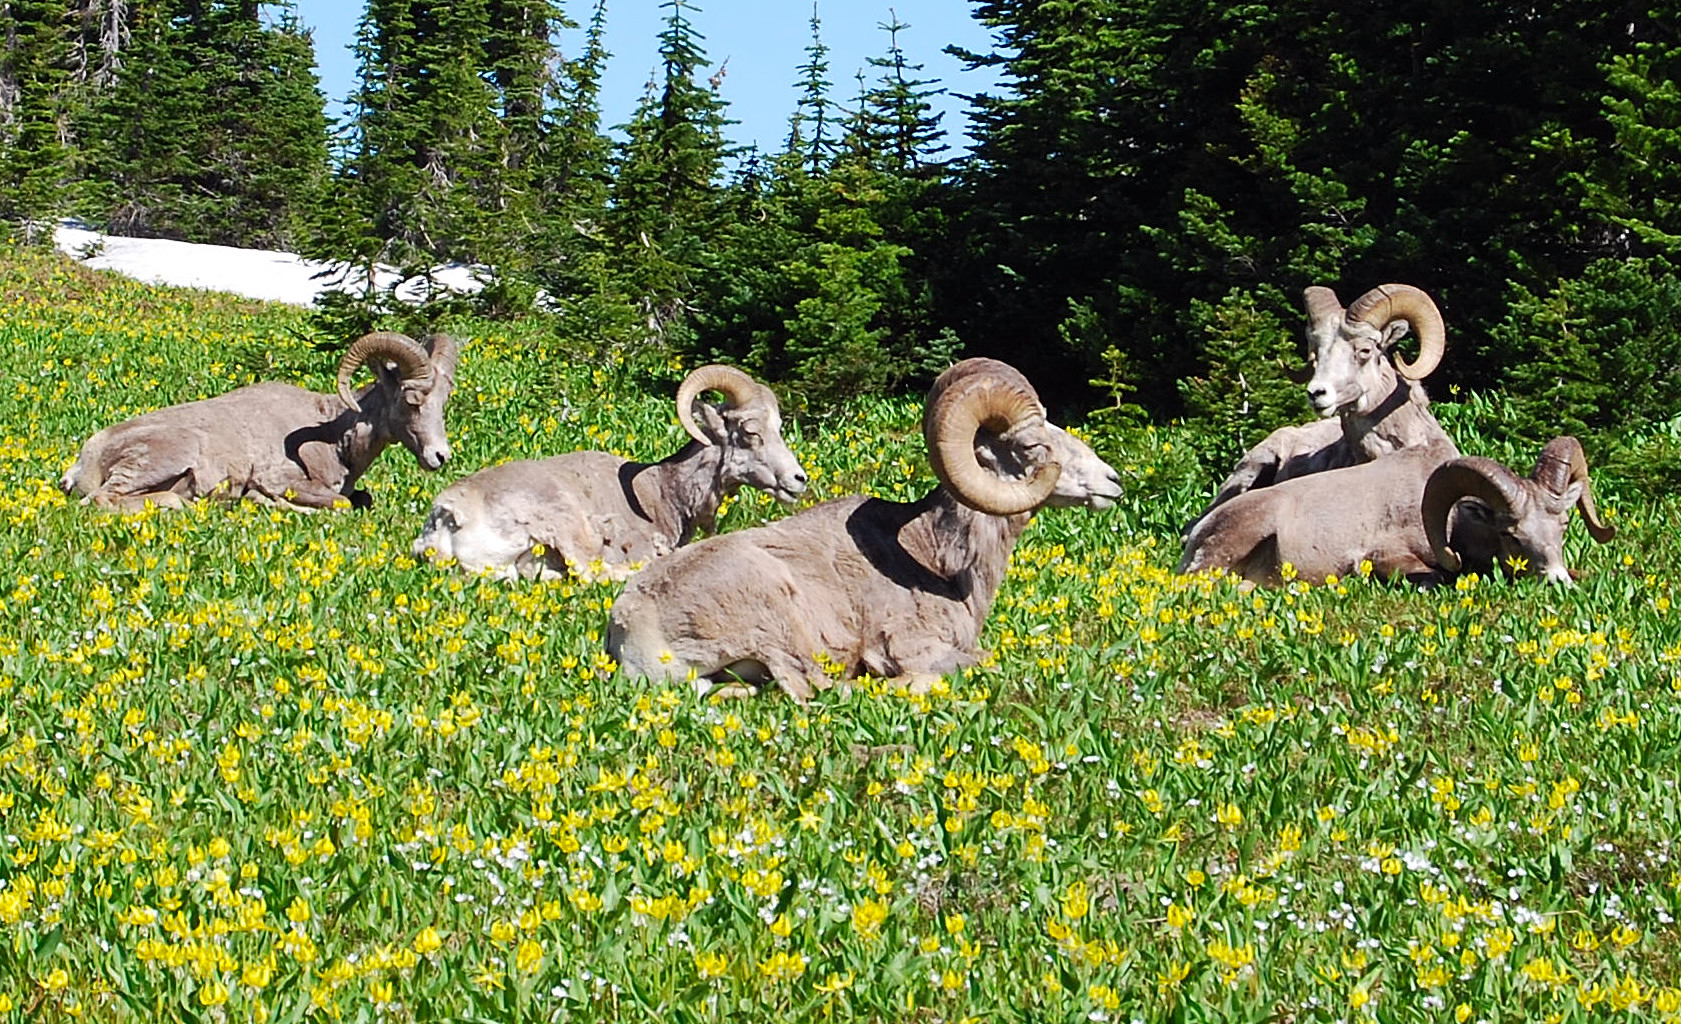 We are thankful for Glacier National Park and bighorn sheep and glacier lilies.